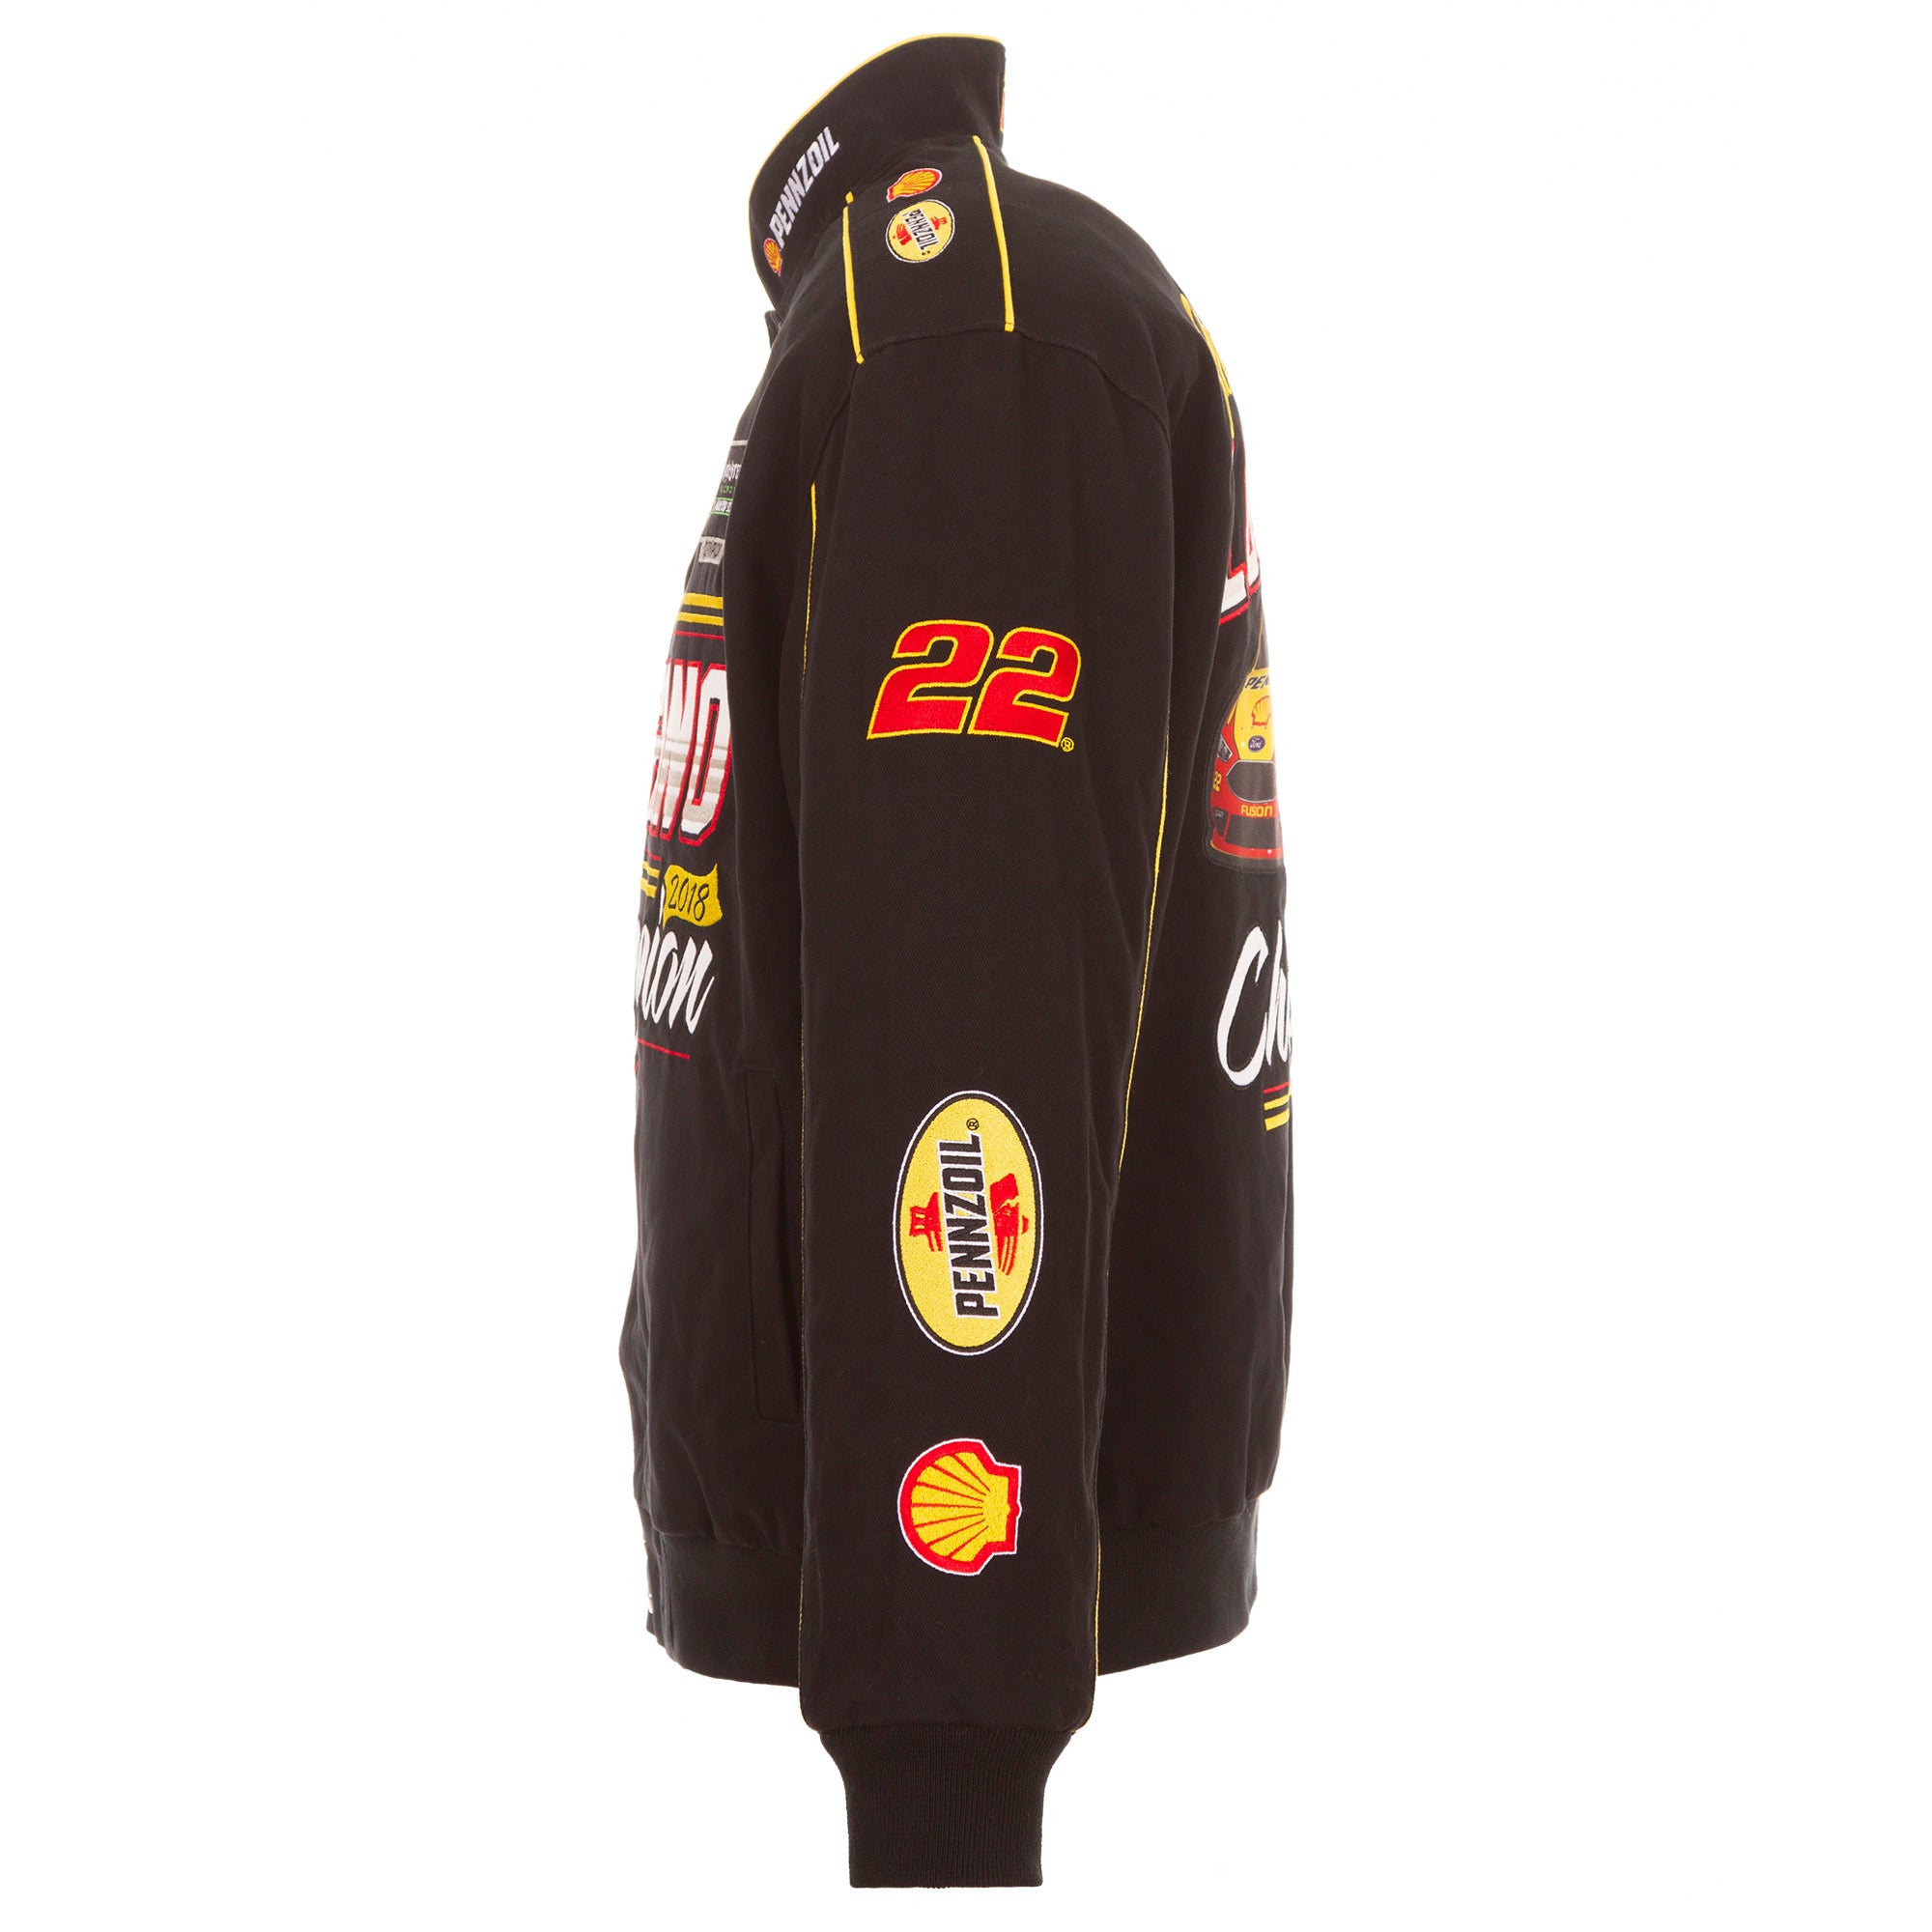 Joey Logano – JL Black Solo-Style Reusable Cup